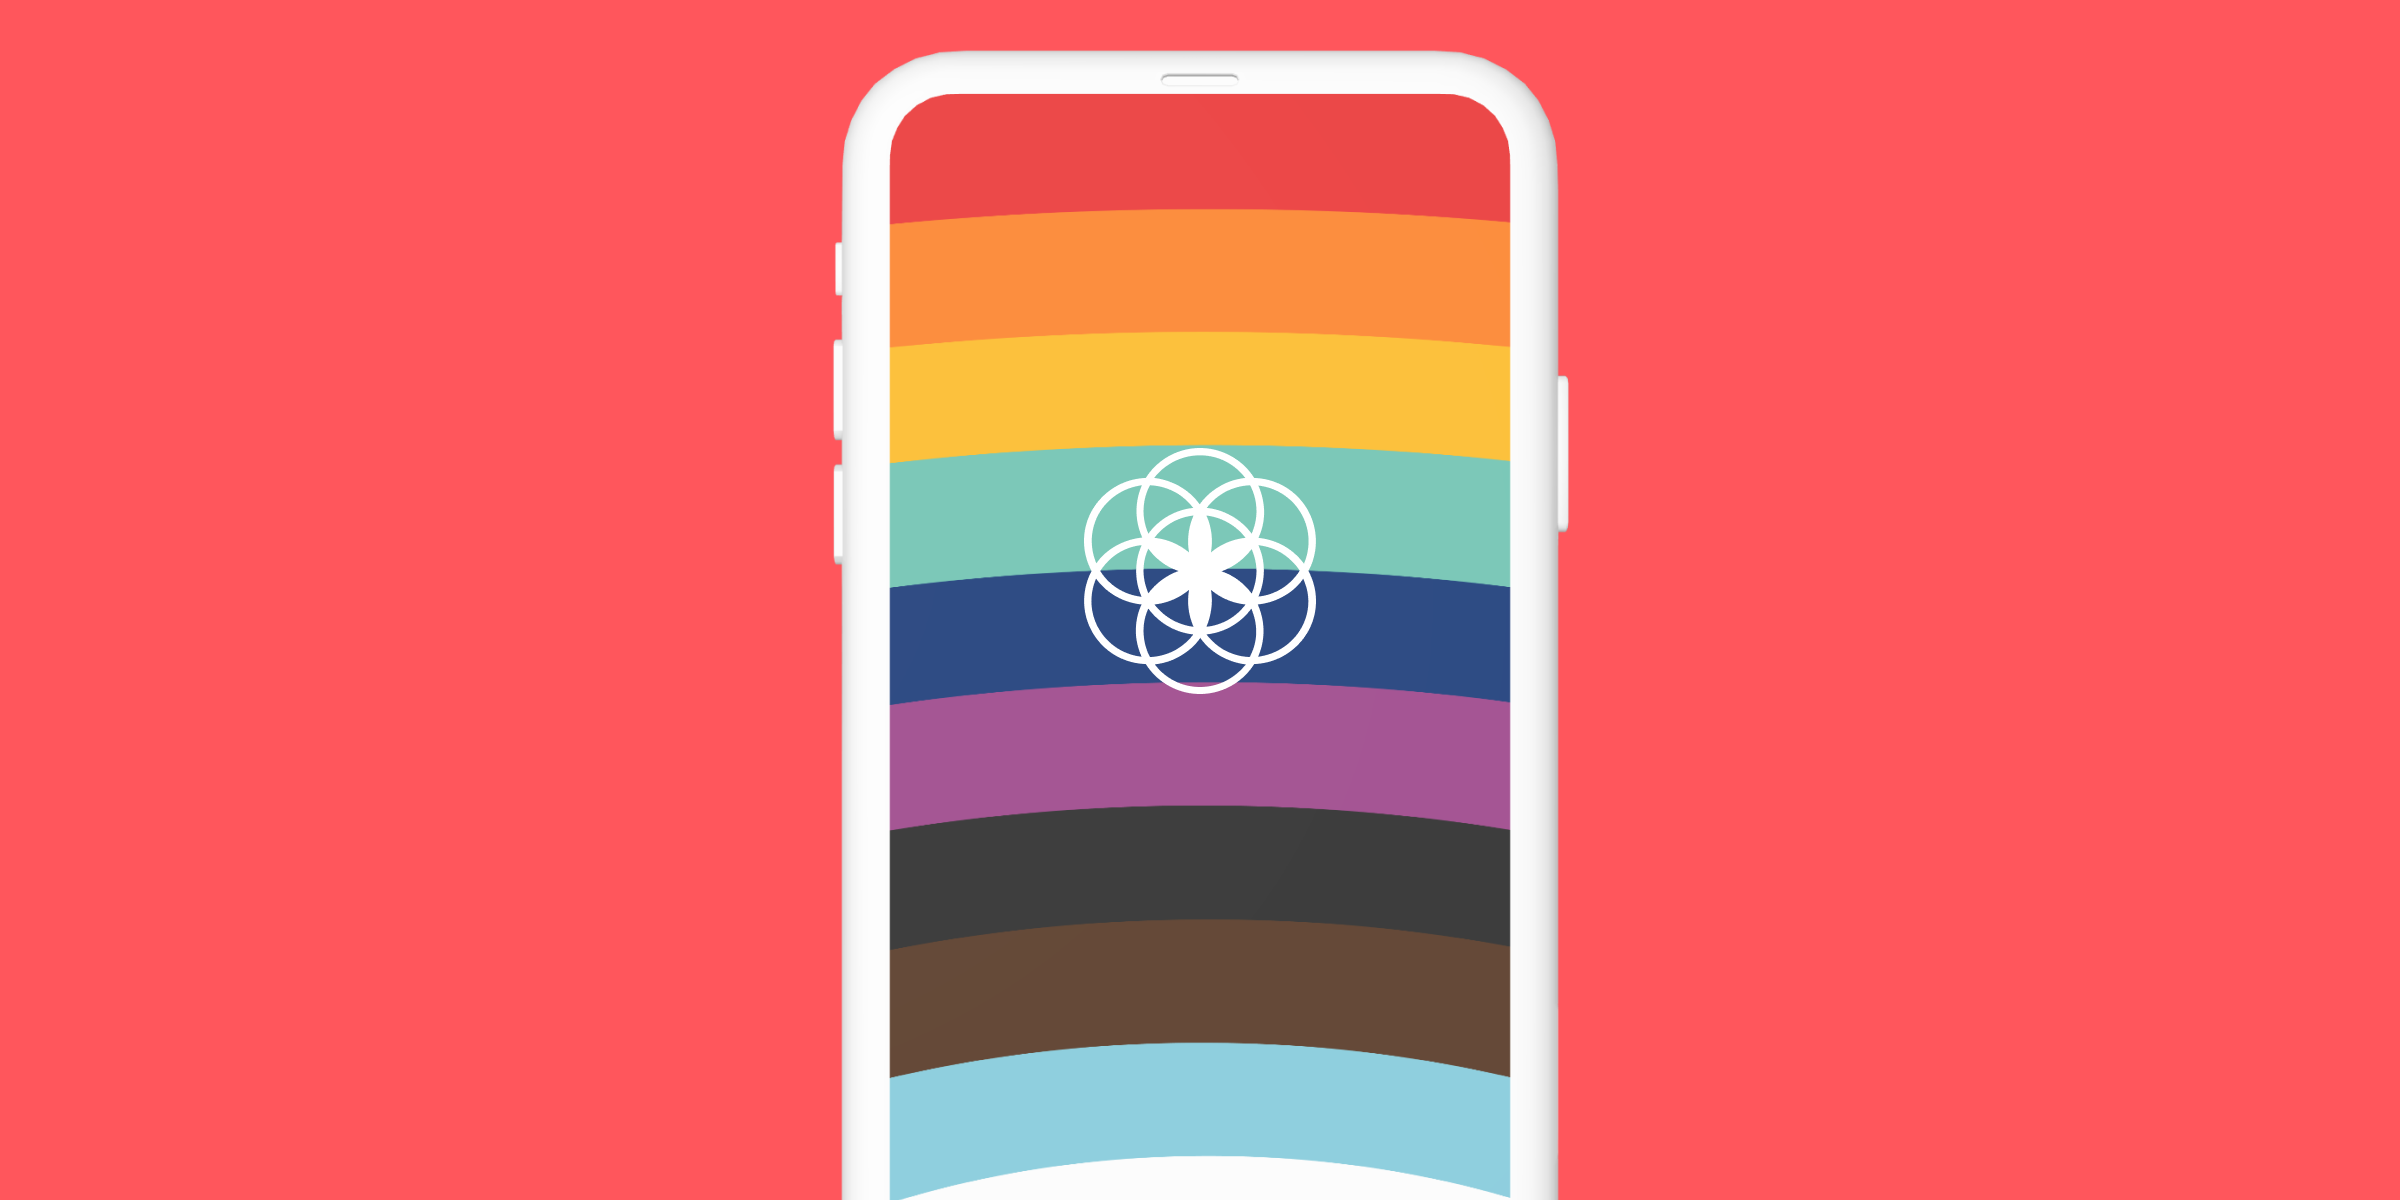 An illustration of a smart phone with the pride flag and the clue logo on it. 